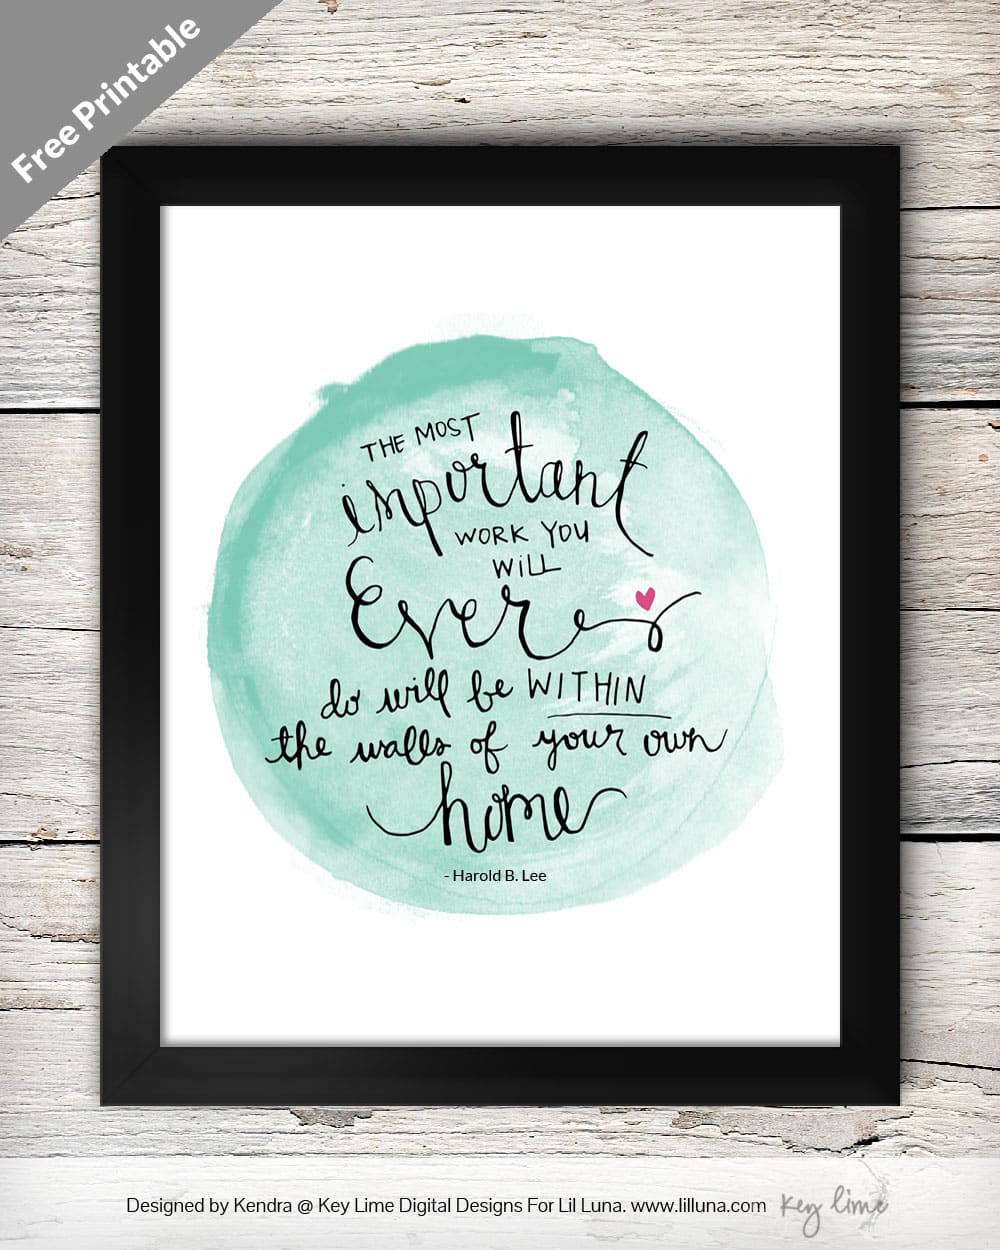 The Most Important Work You will ever do will be within the walls of your own home - LOVE this quote! Free print on { lilluna.com }